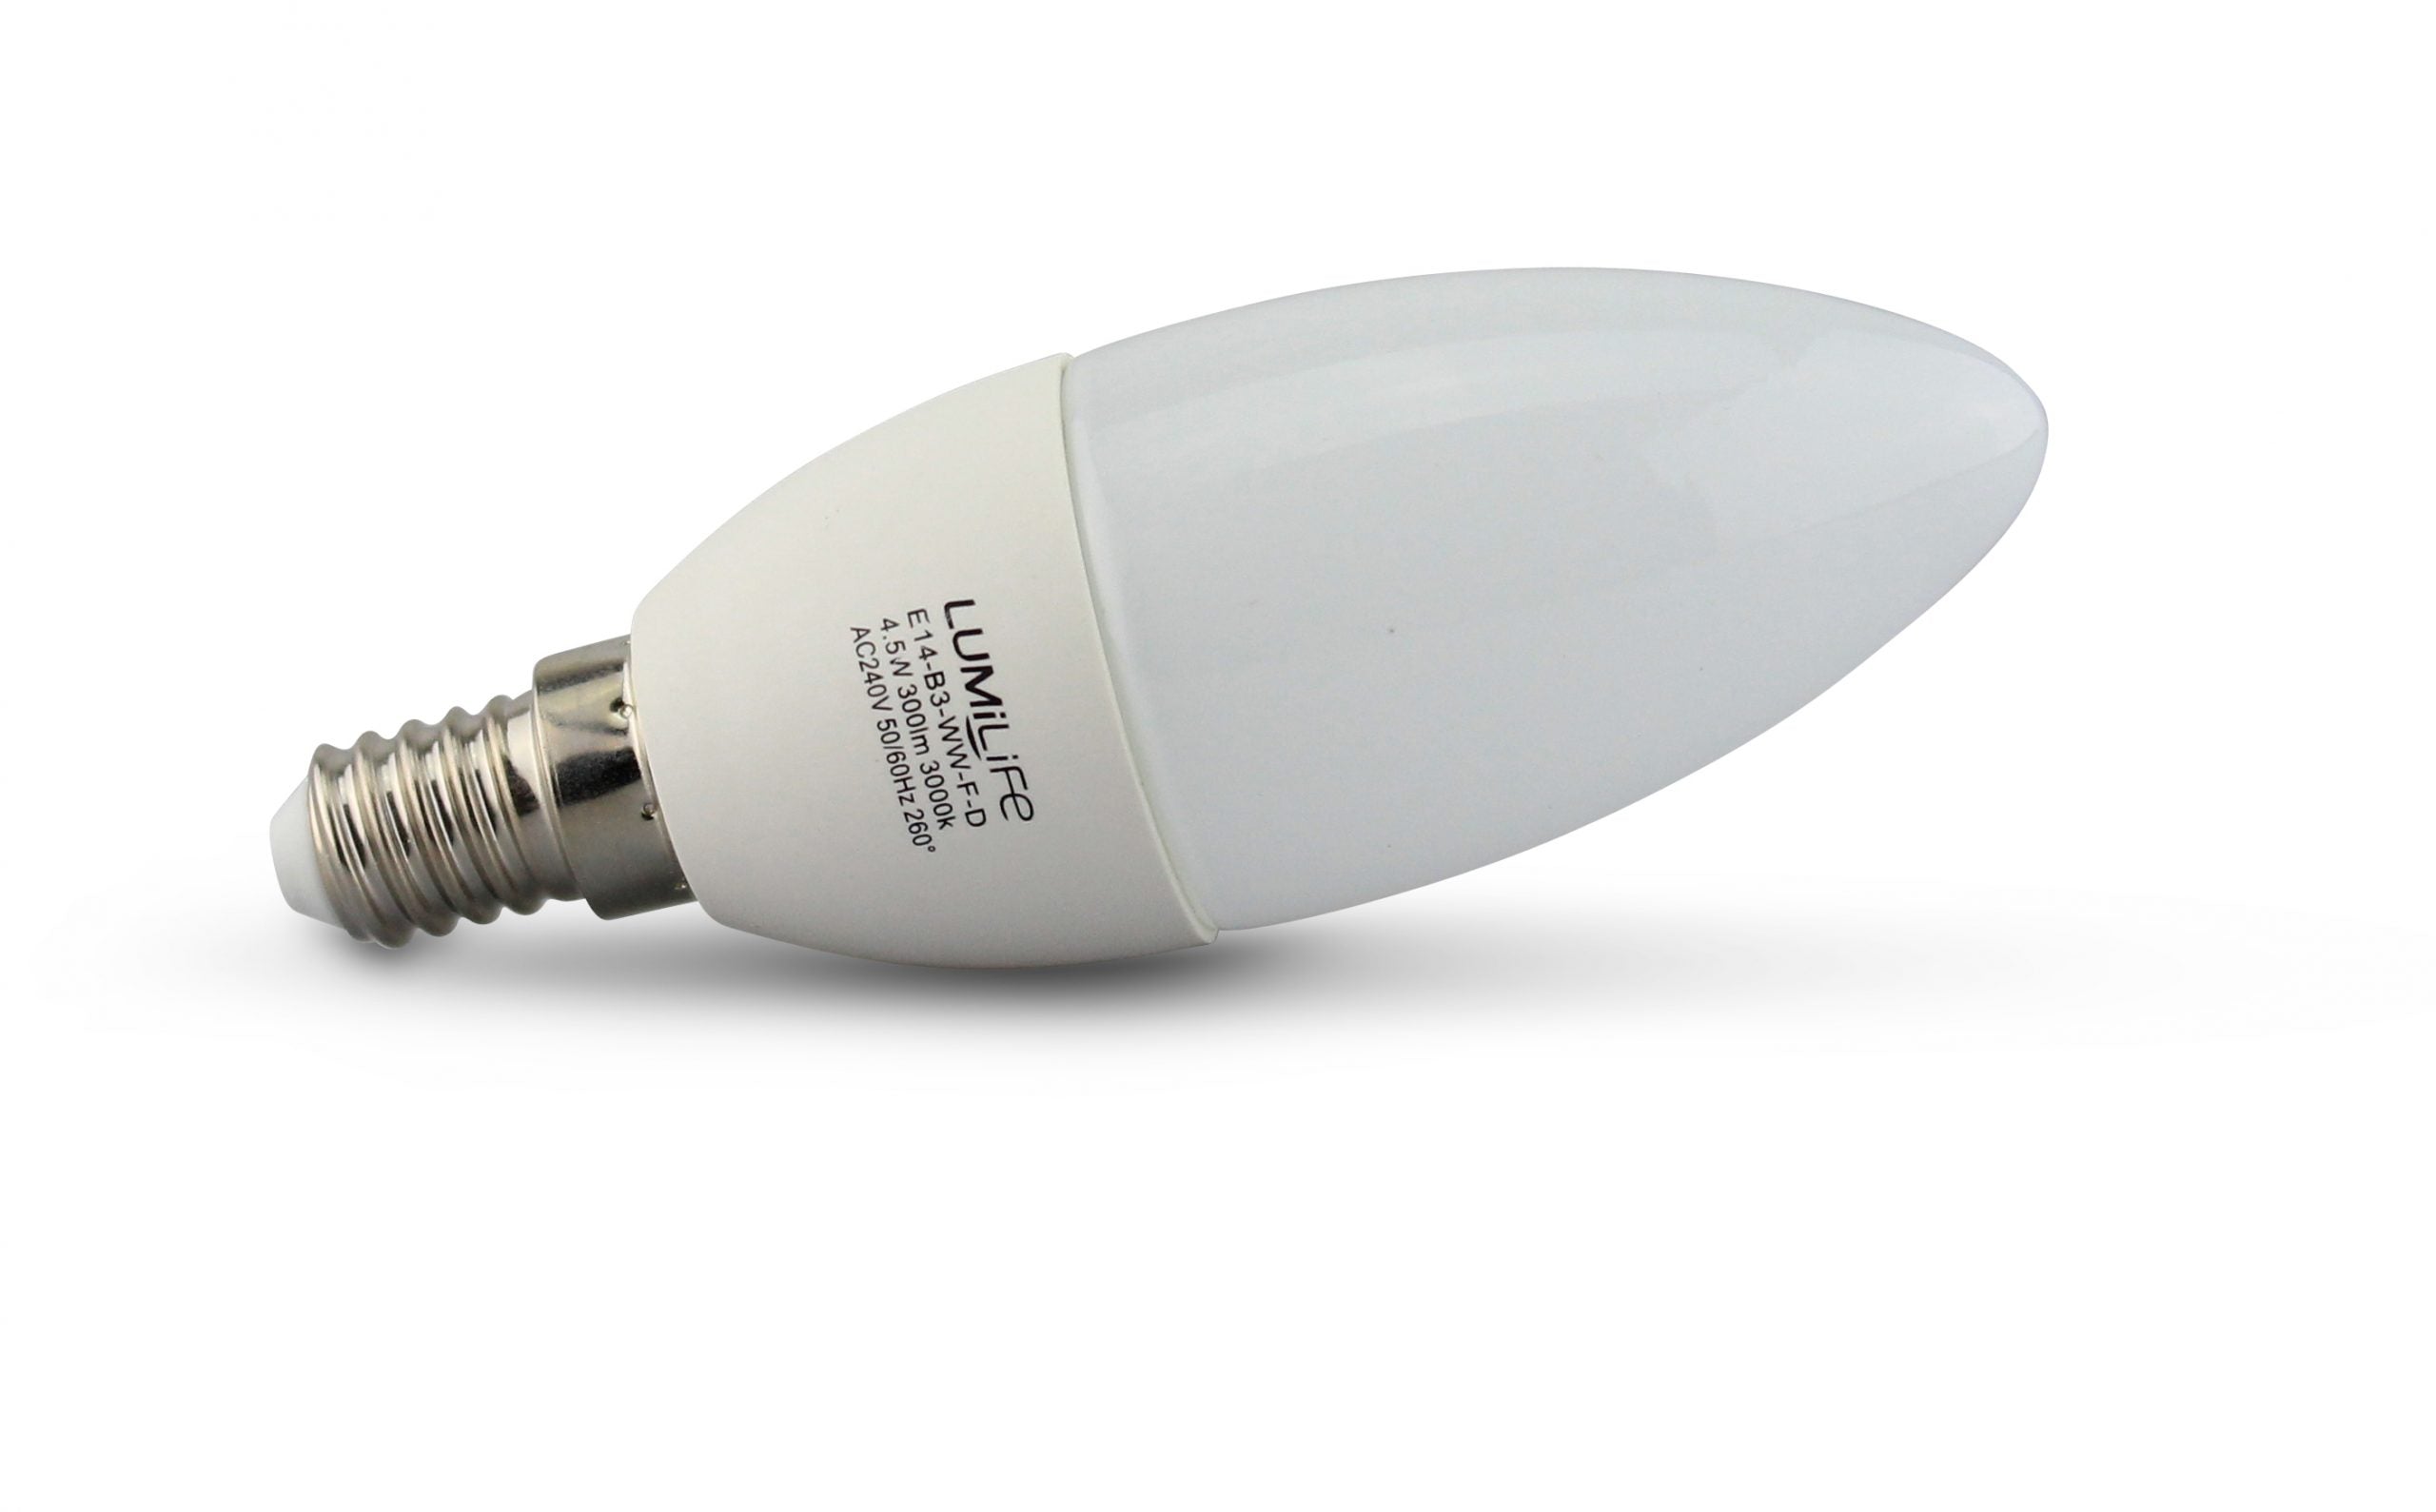 What Is the Difference Between E27 and E14 Light Bulbs? - Lighting